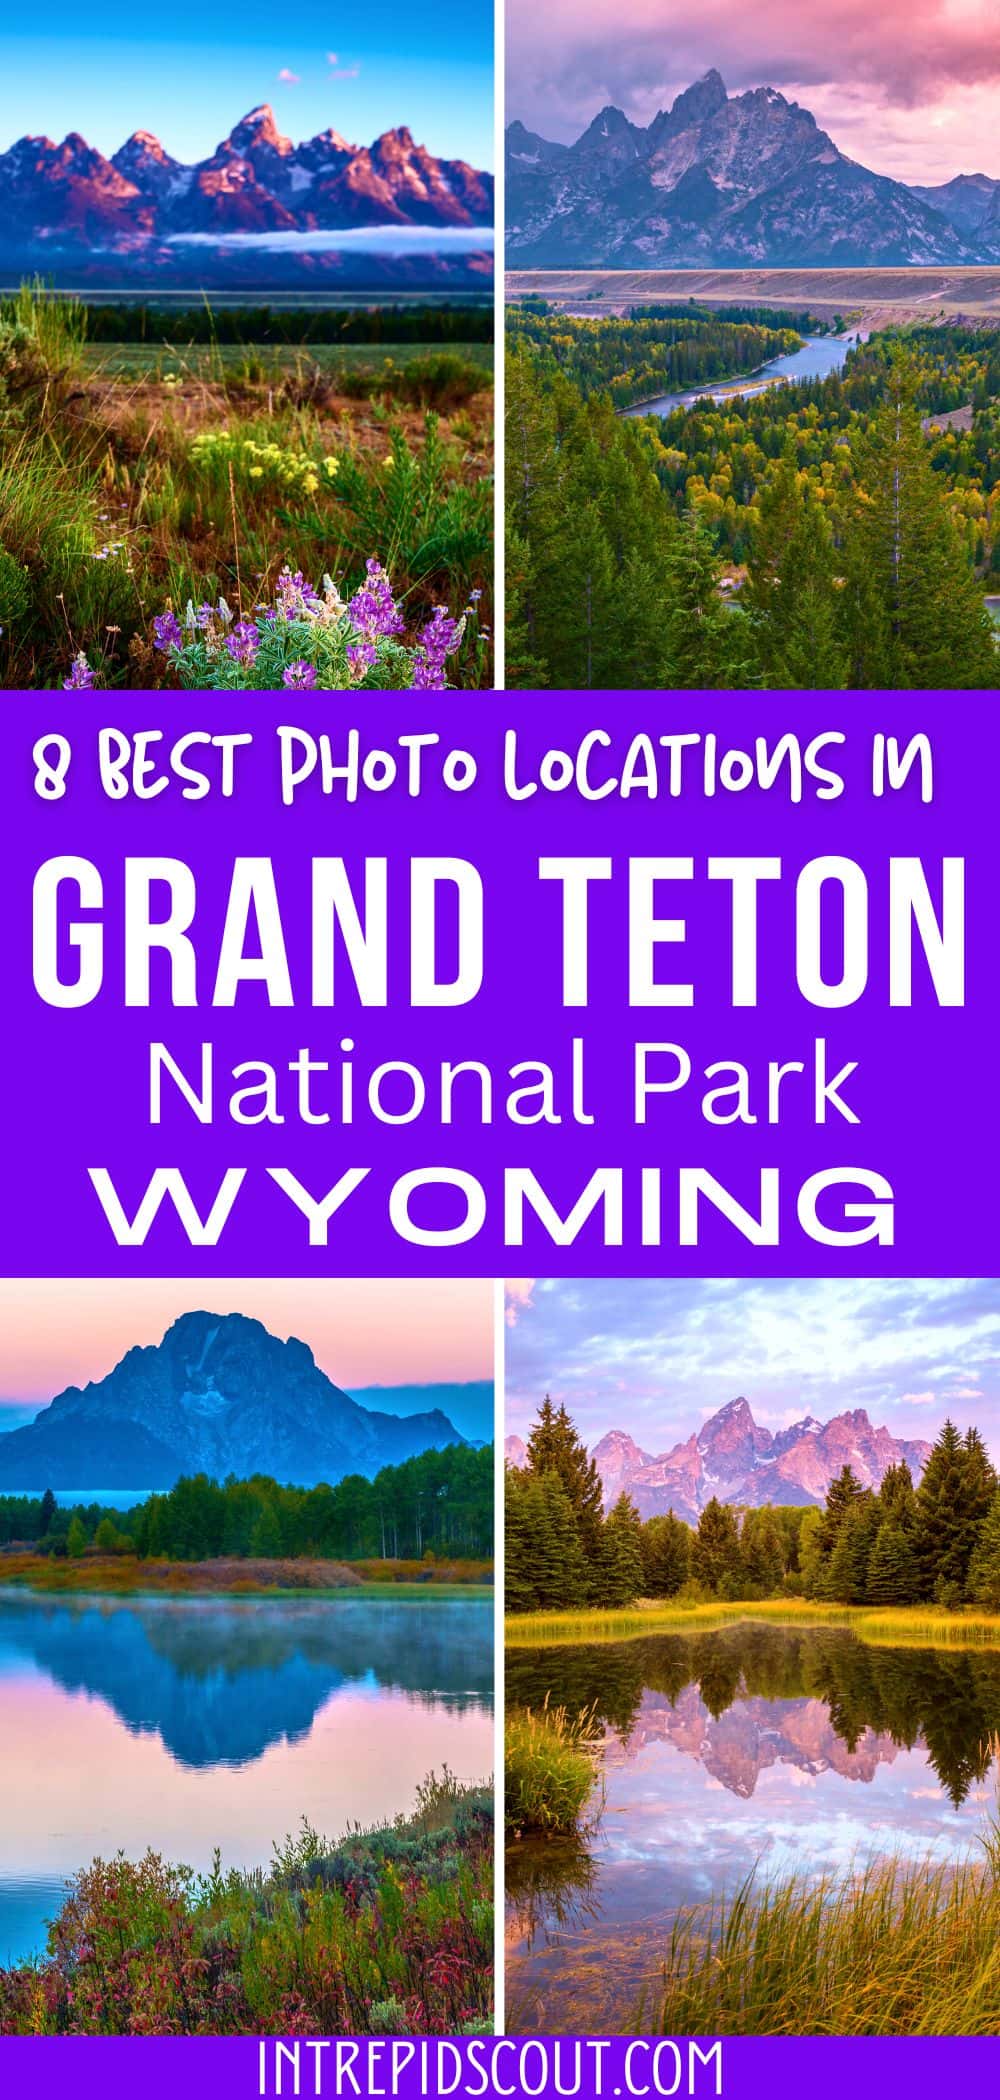 Best Photography Locations in Grand Teton